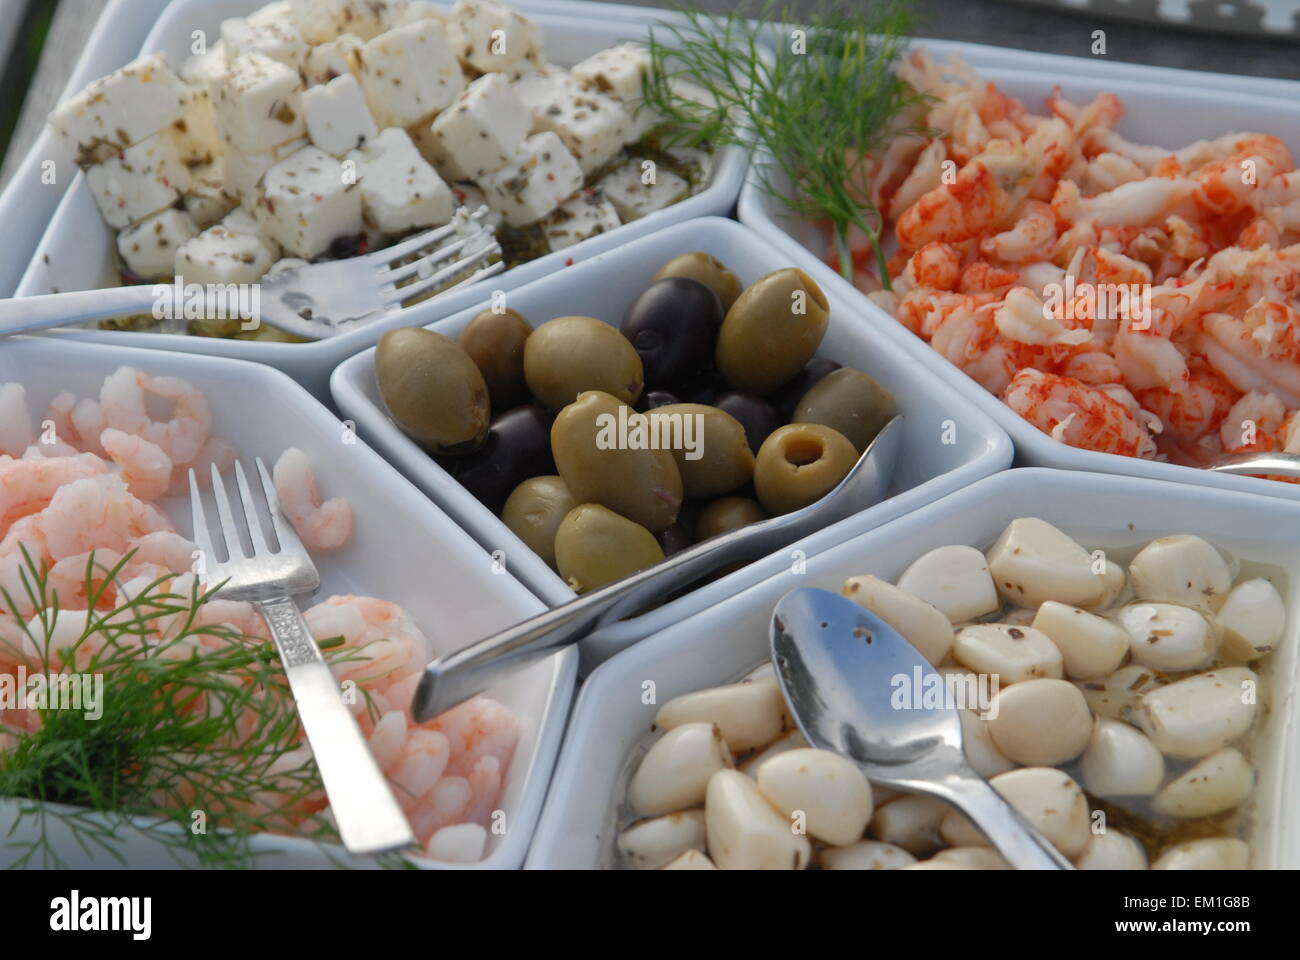 Buffet platter with hors d'oeuvres. Stock Photo